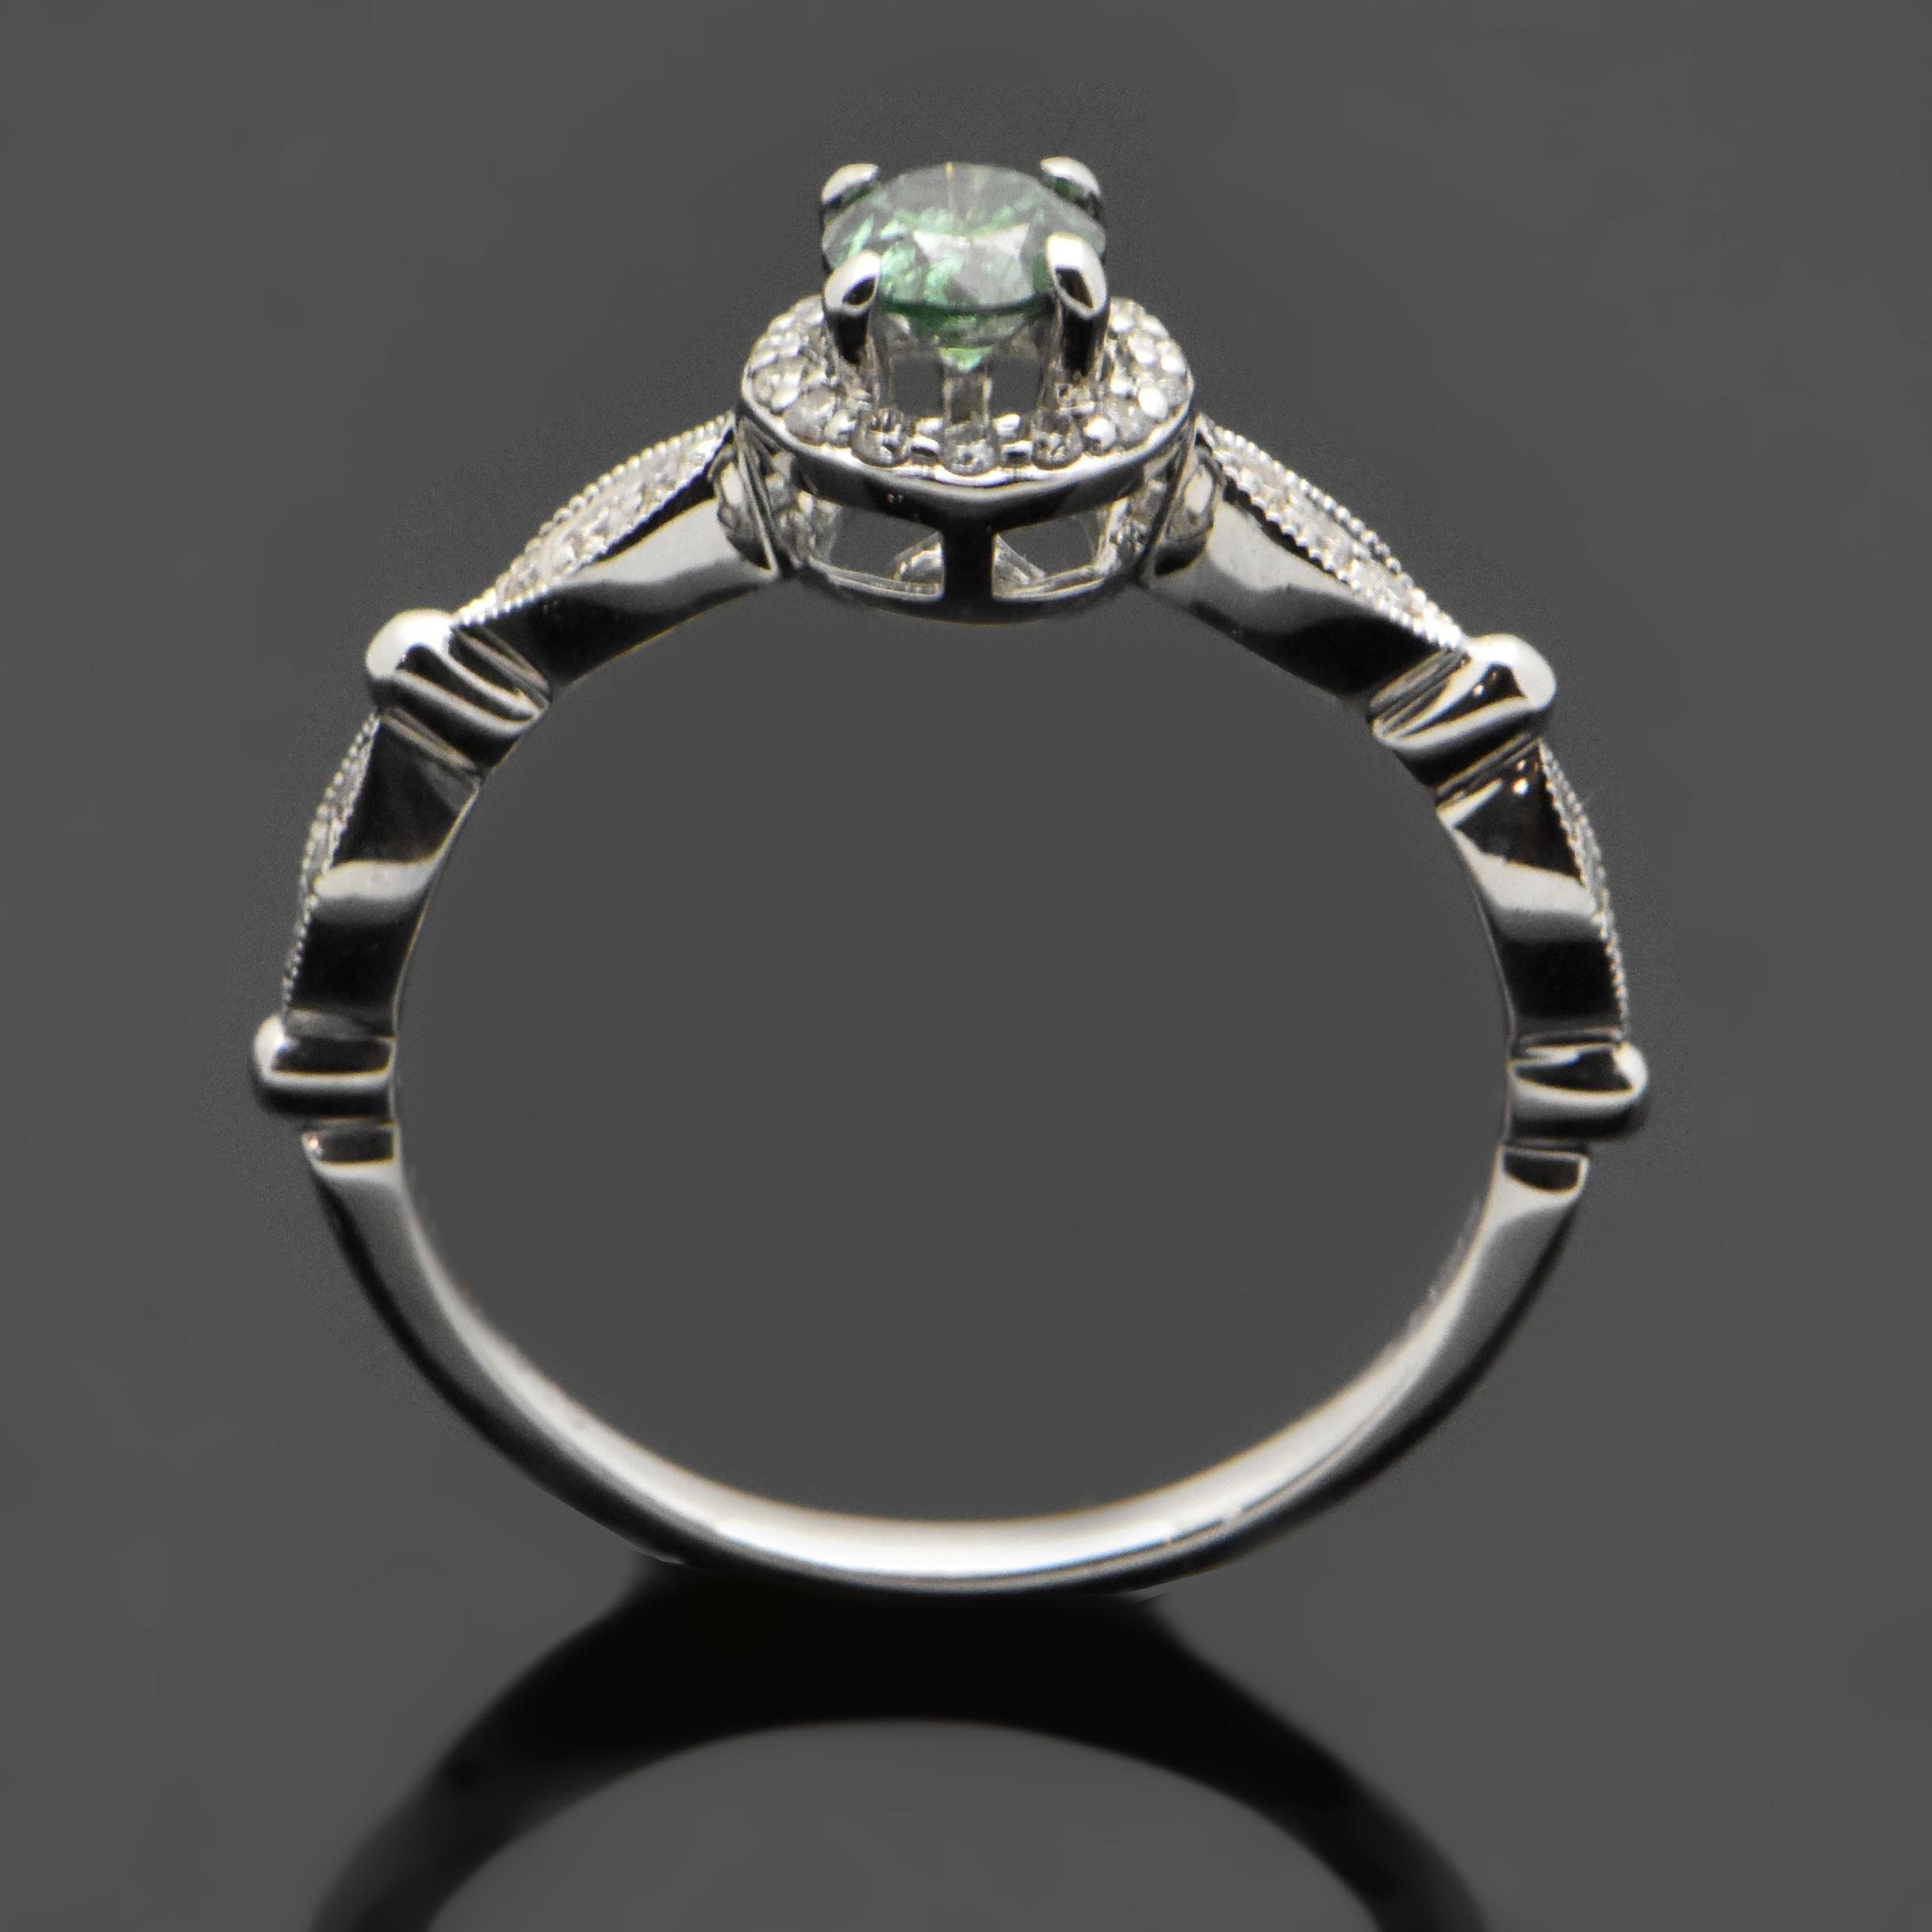 This 14kt white gold ring features a brilliant-cut green diamond with an estimated weight at 0.35ct. The green diamond is surrounded by diamonds and has diamond accents down the sides of the shank with an estimated 0.16cttw. Estimated weight of gold